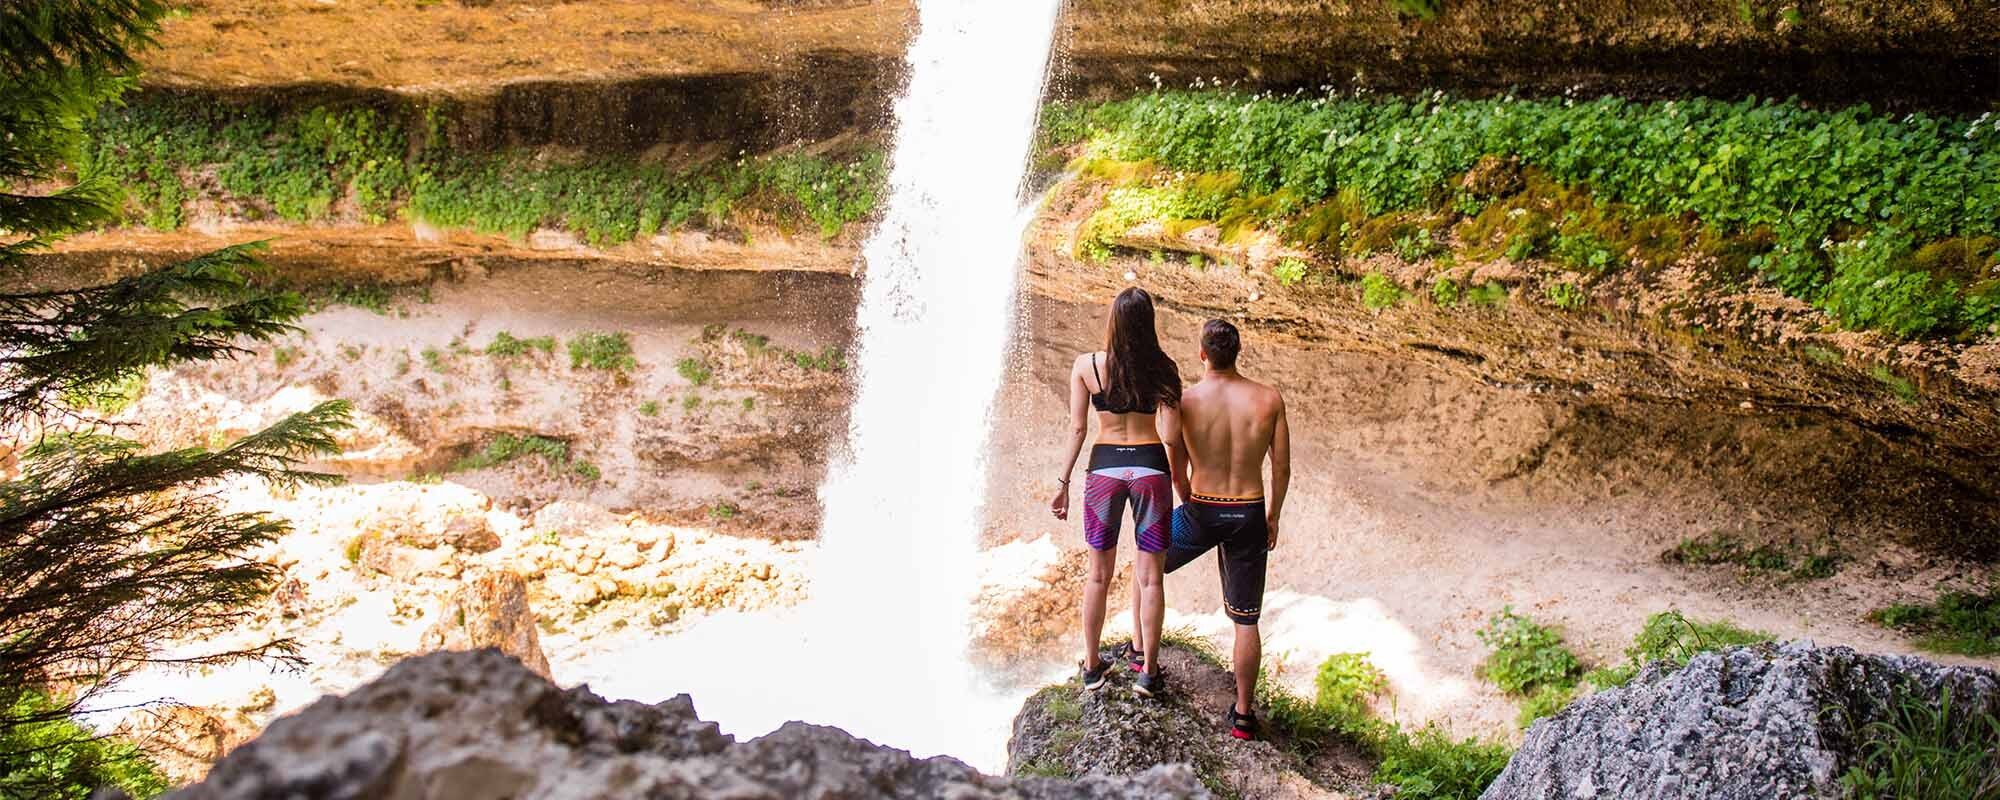 A couple standing under the waterfall.